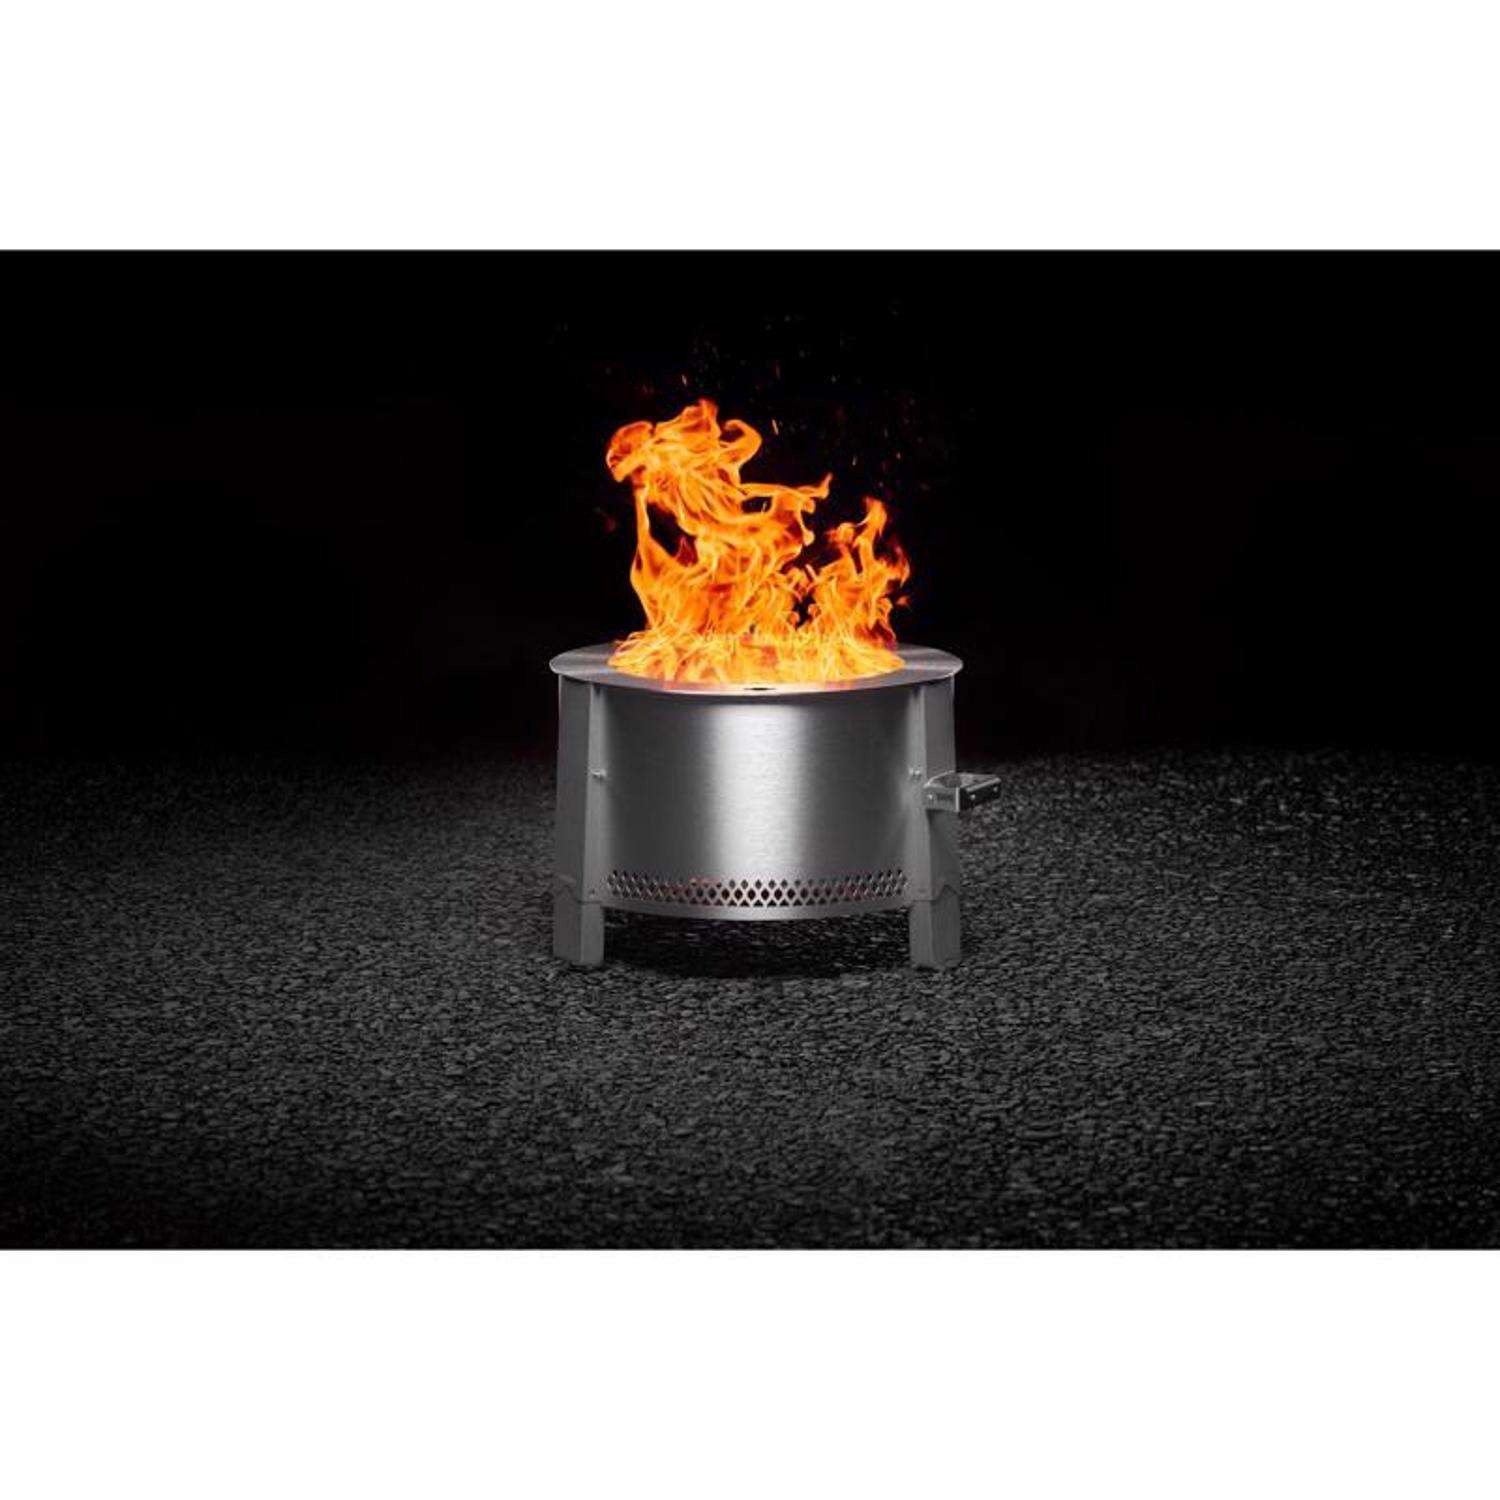 Breeo Y Series Smokeless Fire Pit